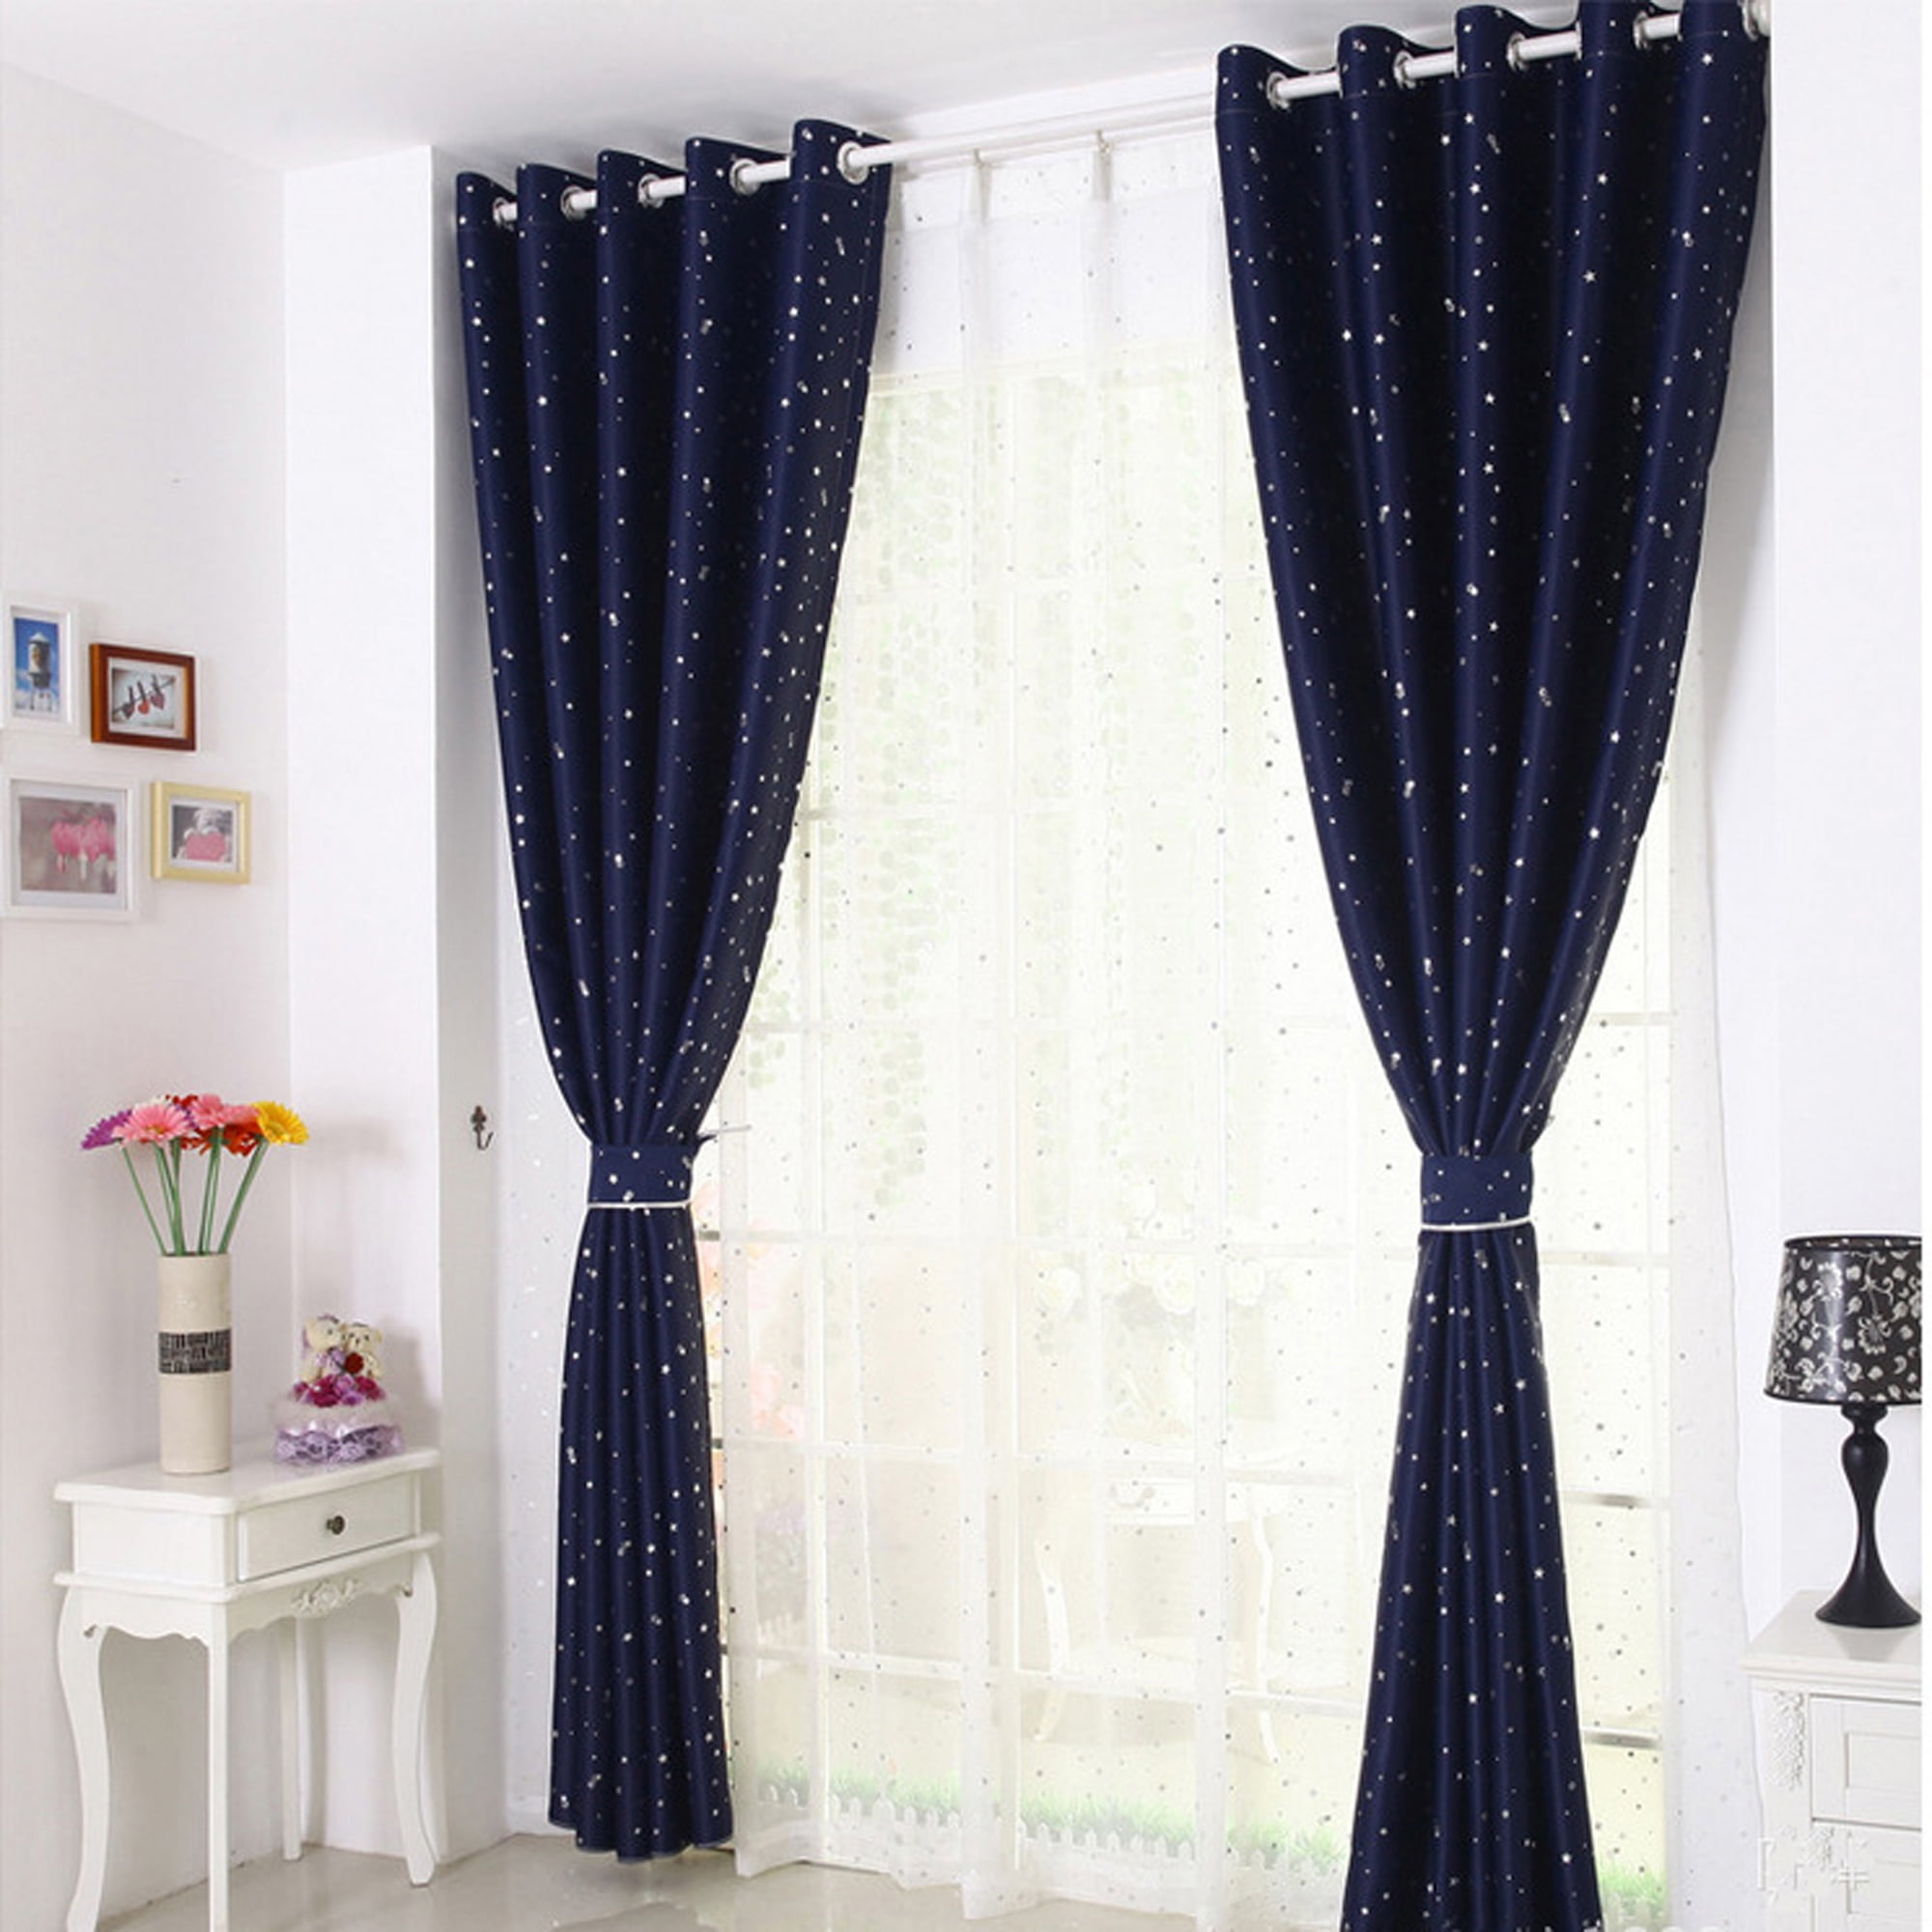 NK Grommet Tulle With Beads Drape Panel Sheer Scarf Valances Divider Room  Door Window Curtain Decorative 1x2.5m Luxury Floral Purple Coffee 